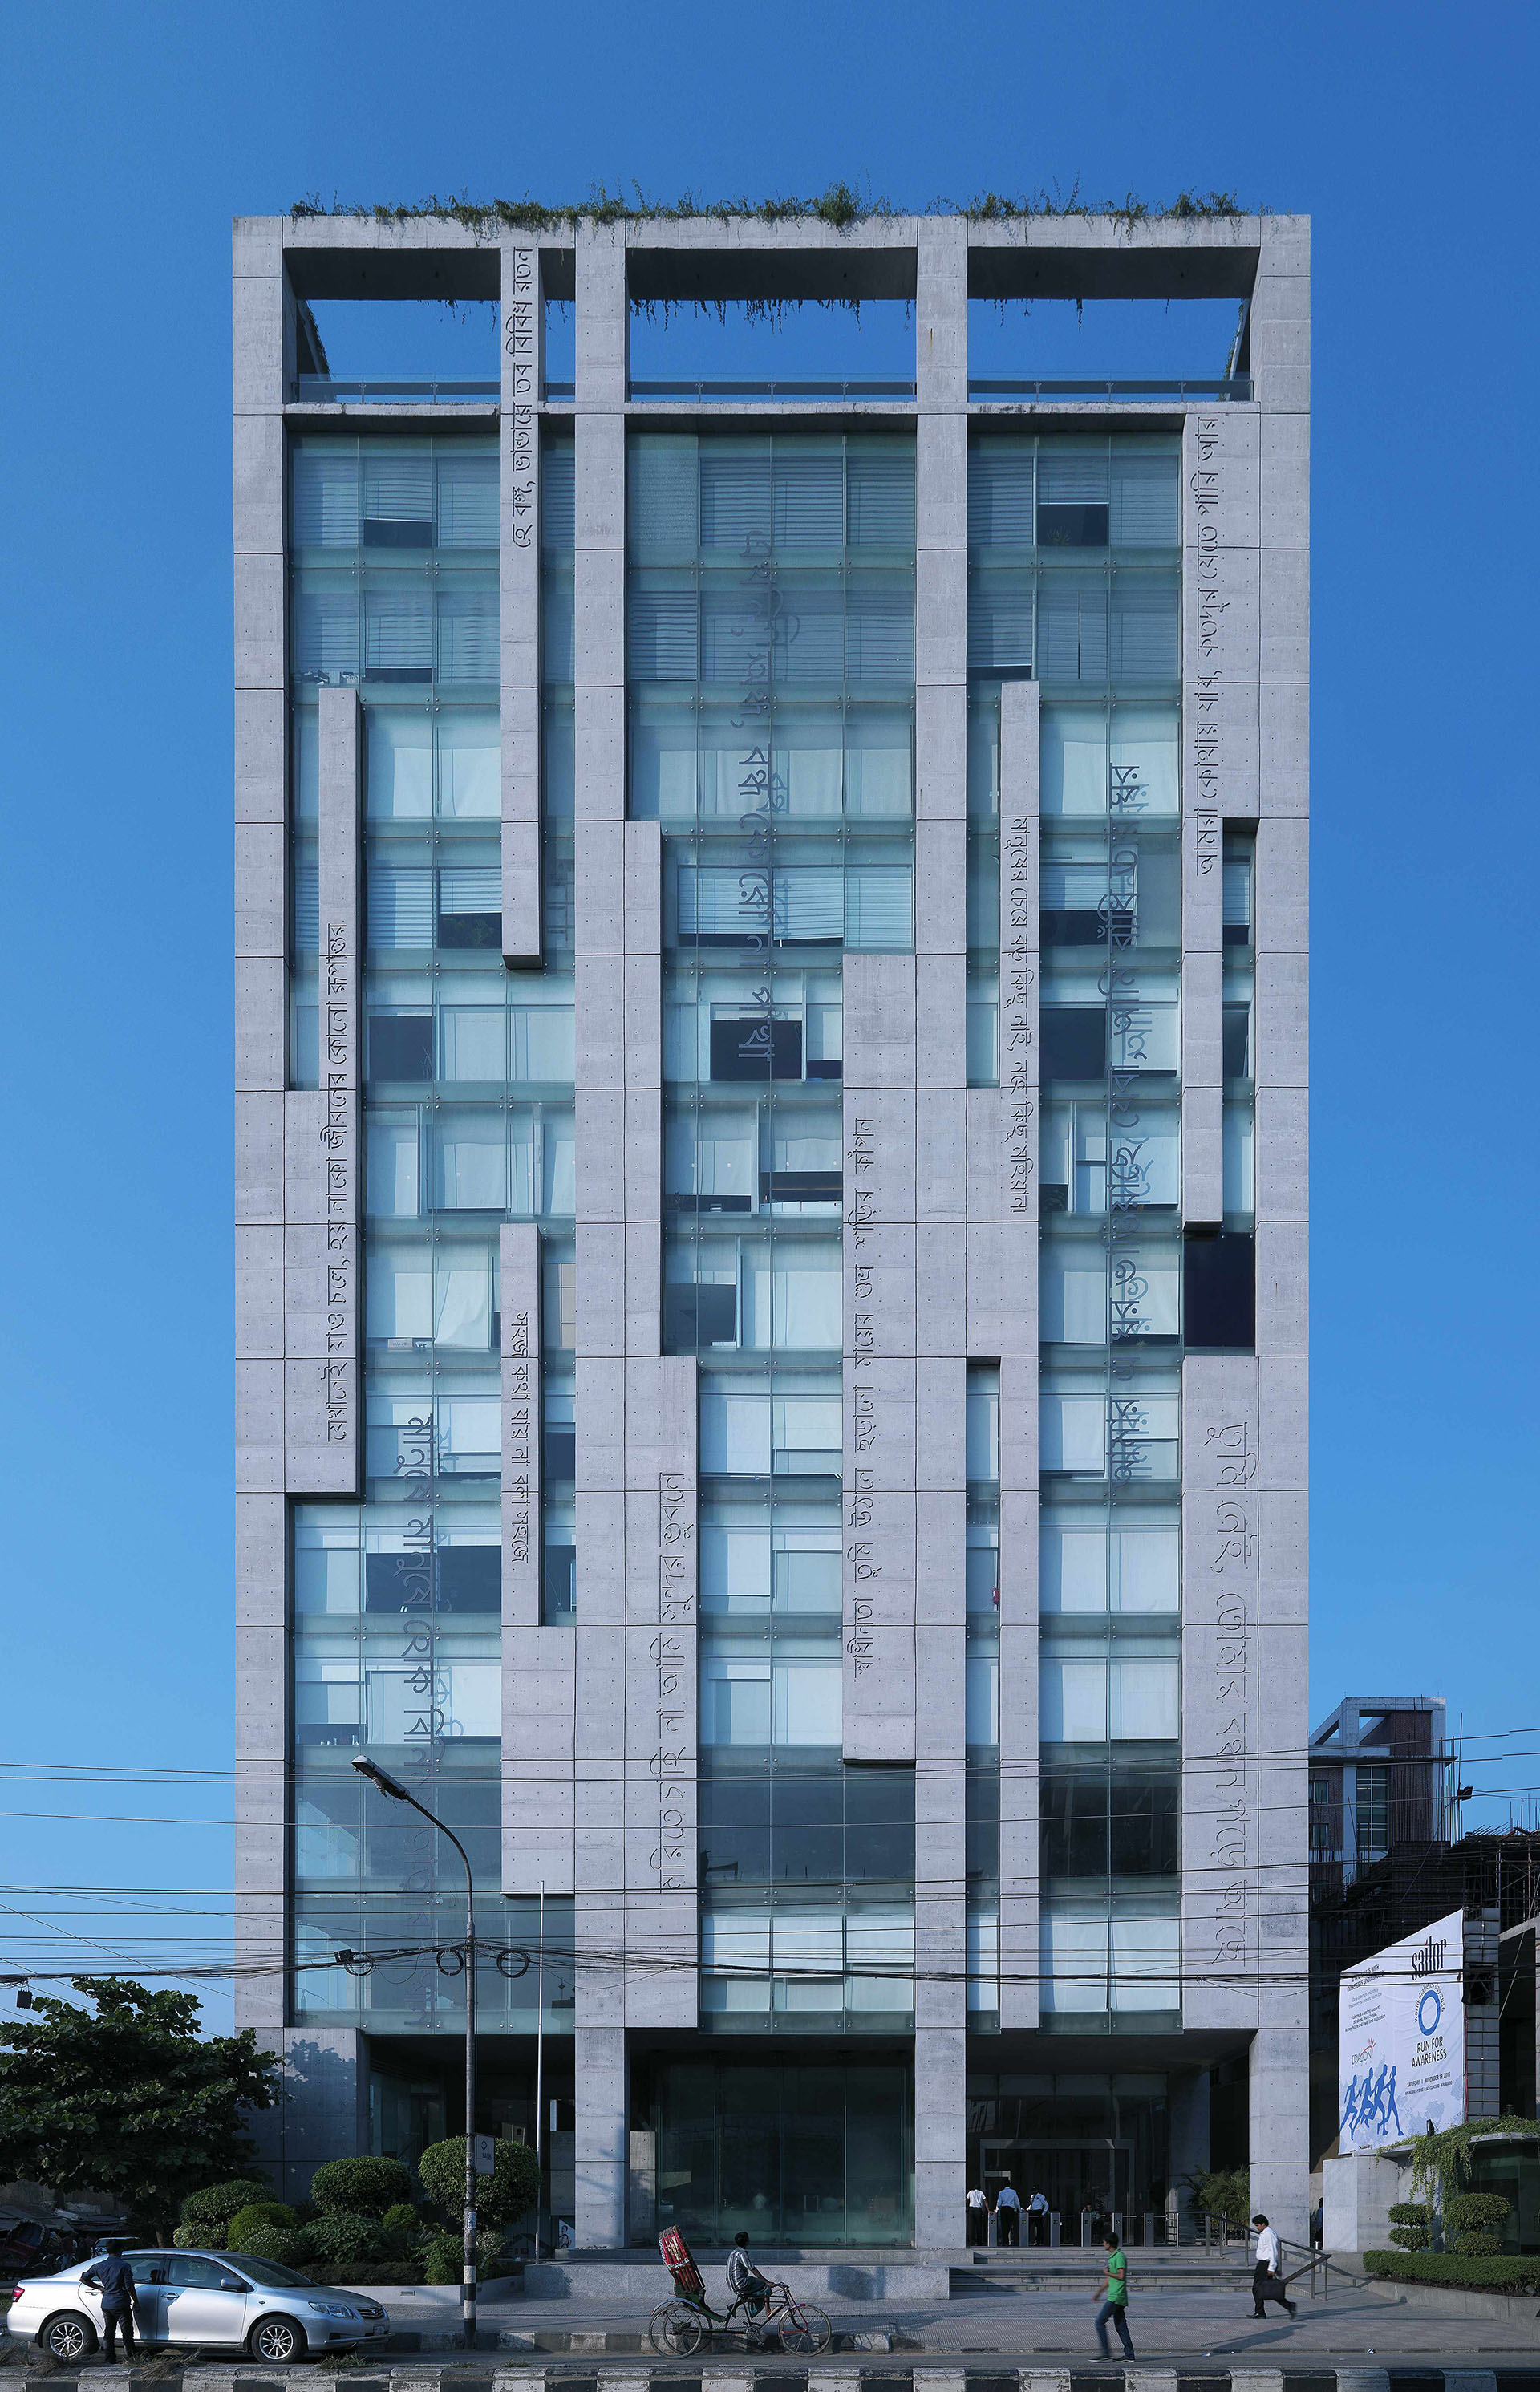 <p>Ninakabbo is an office building with 14 levels for works and convenience, 2.5 floors underground for car parking and service spaces.&nbsp;</p>